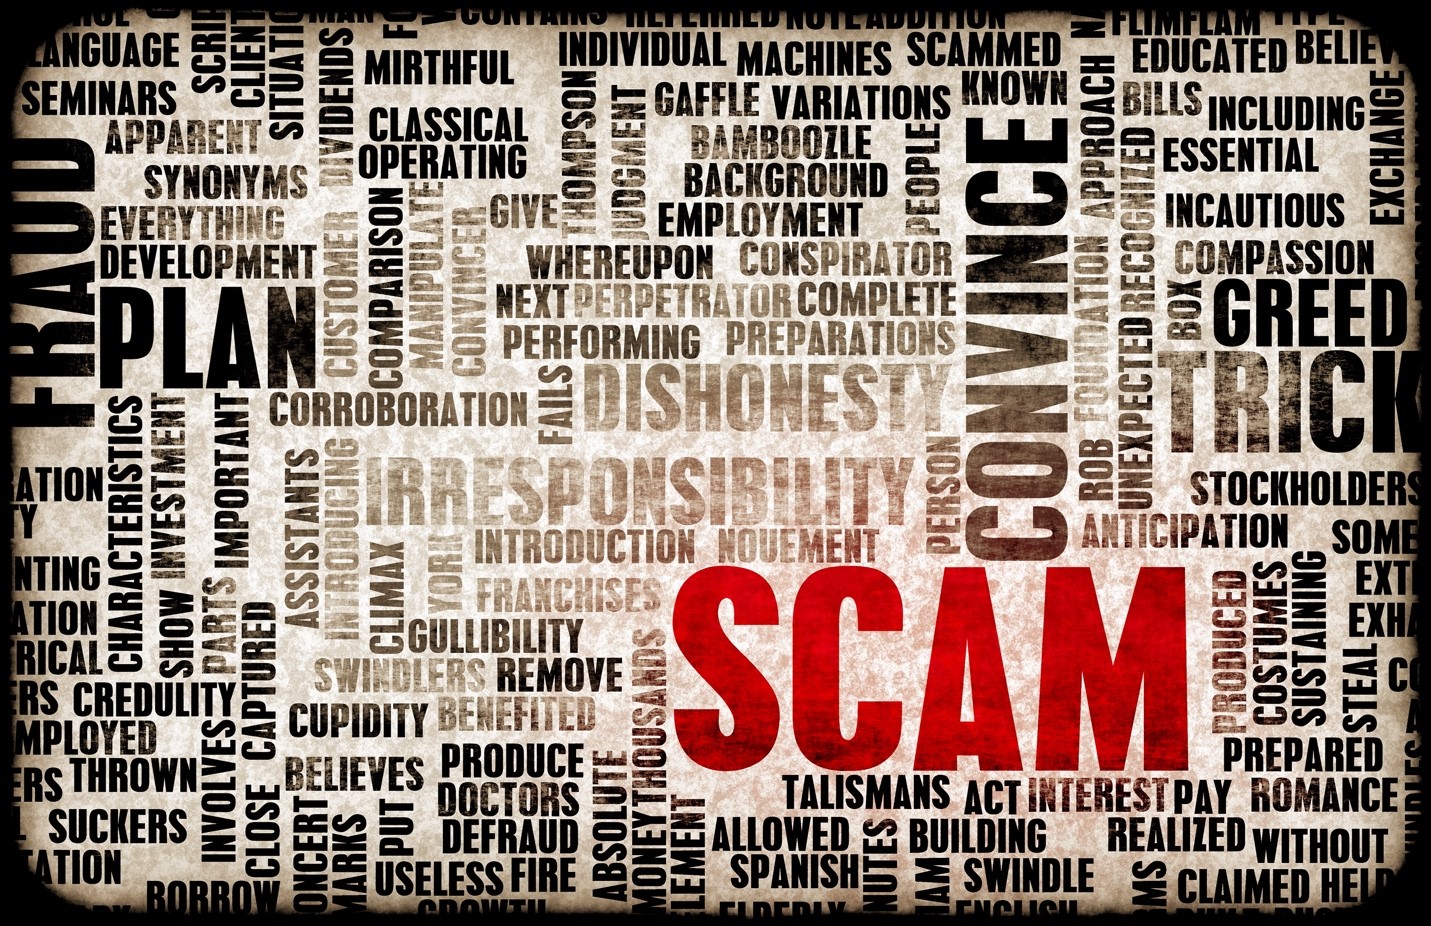 SCAMS AROUND HOLIDAYS AND HOW PRIVATE INVESTIGATORS CAN HELP